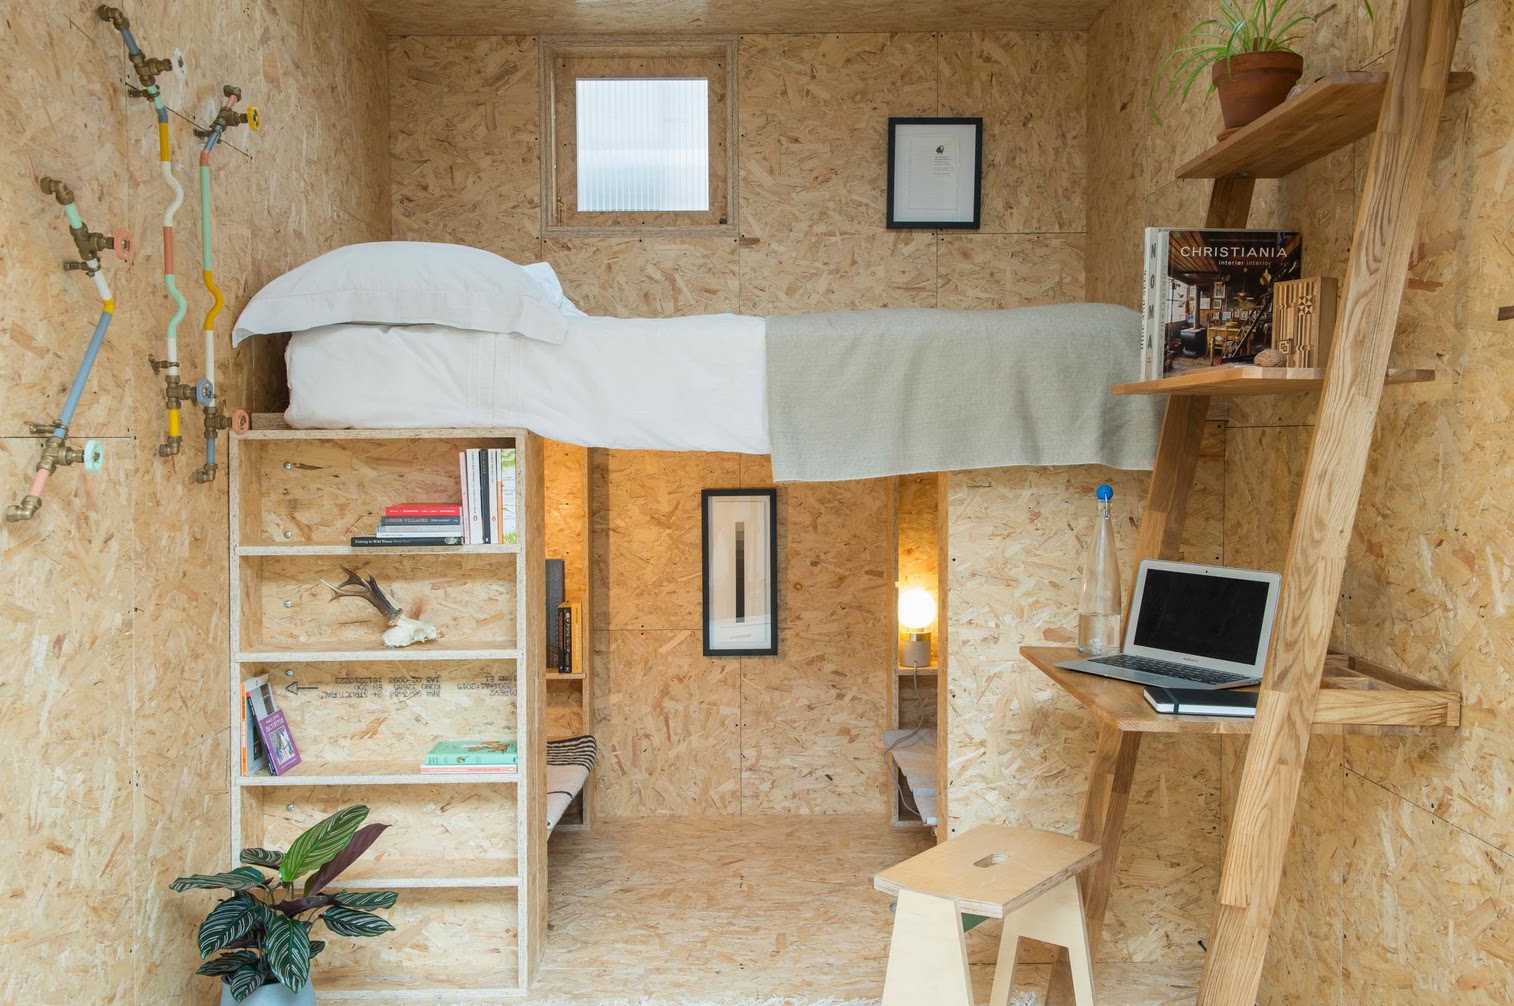 The Shed Project: Micro homes in empty London buildings